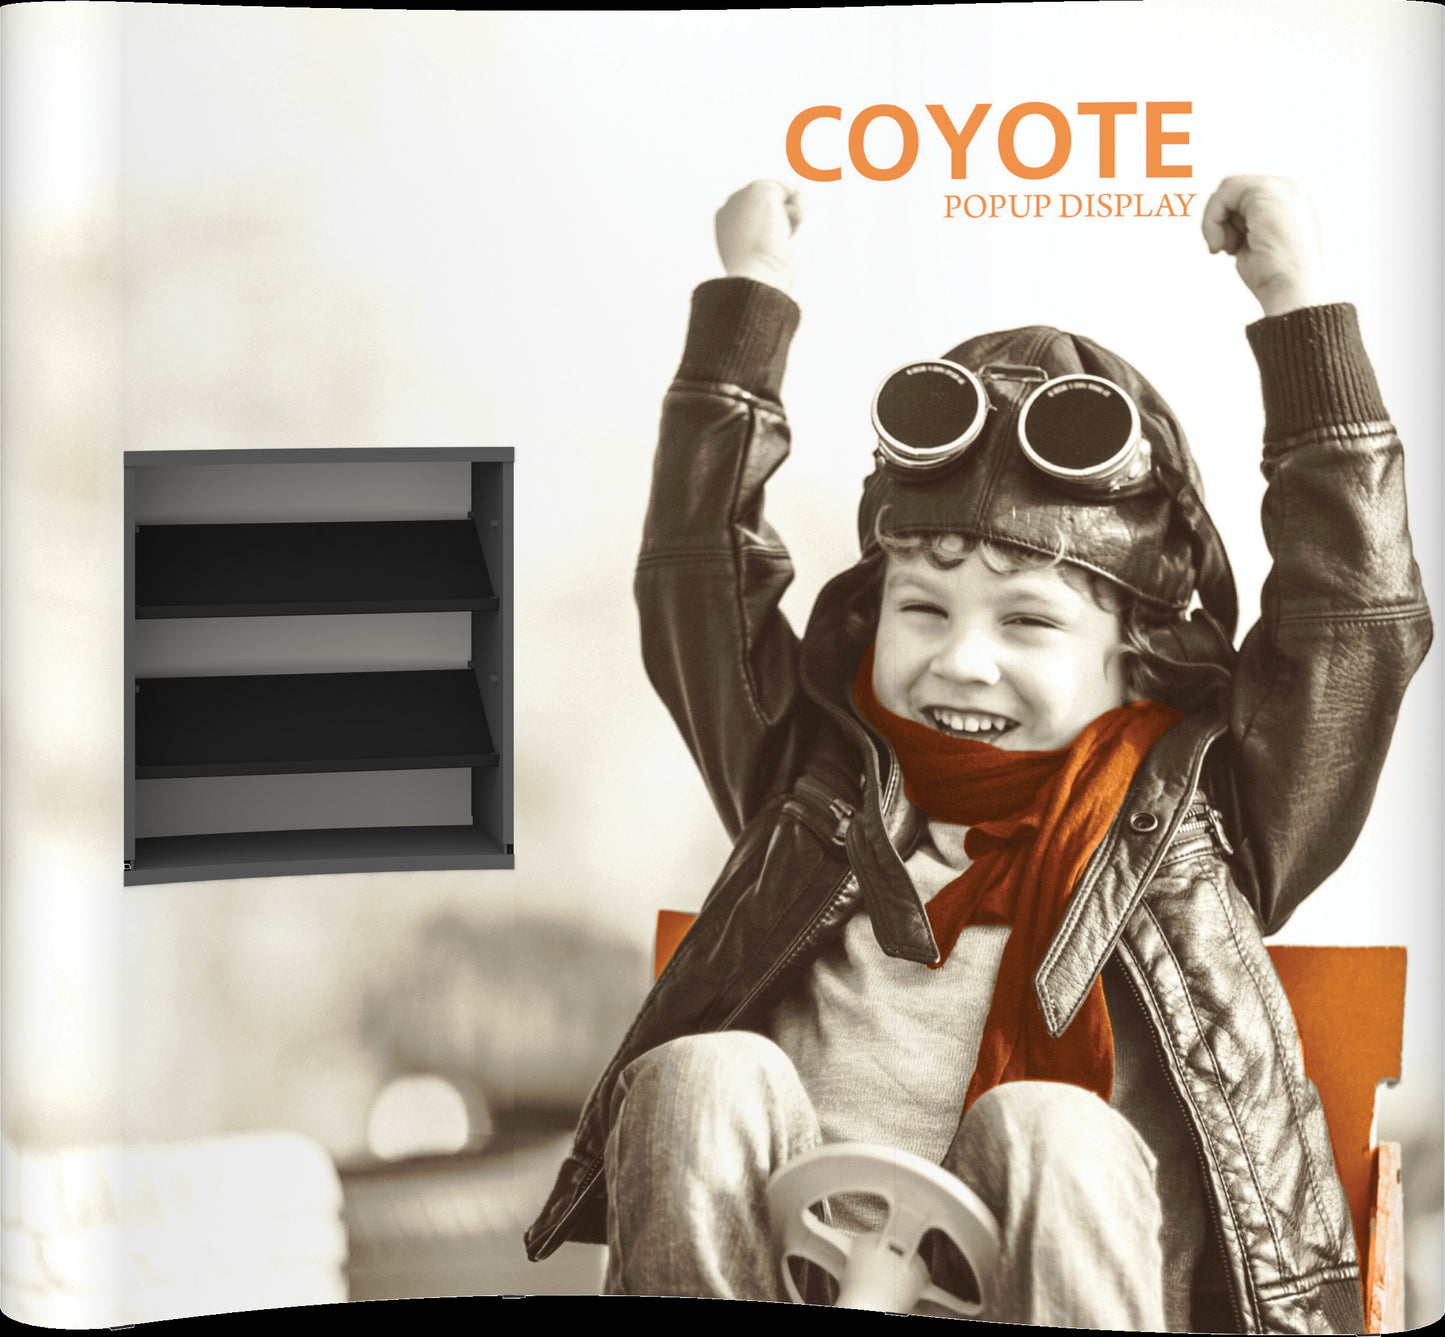 Coyote Internal Shelf Kit for a curved frame Coyote